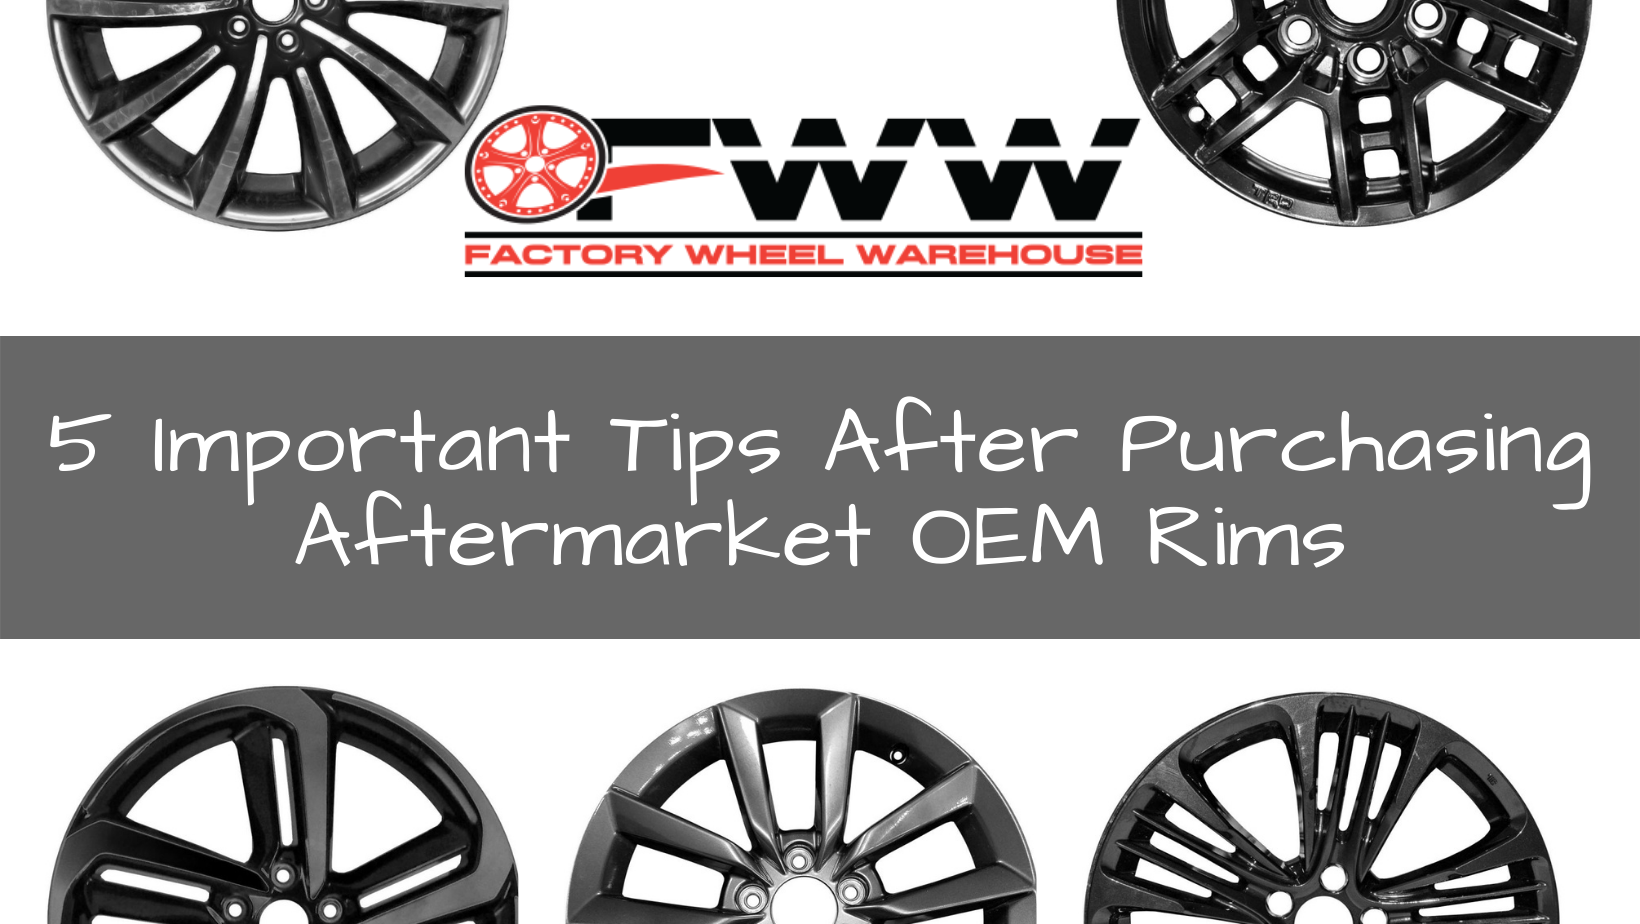 5 Important Tips After Purchasing Your Aftermarket OEM Rims